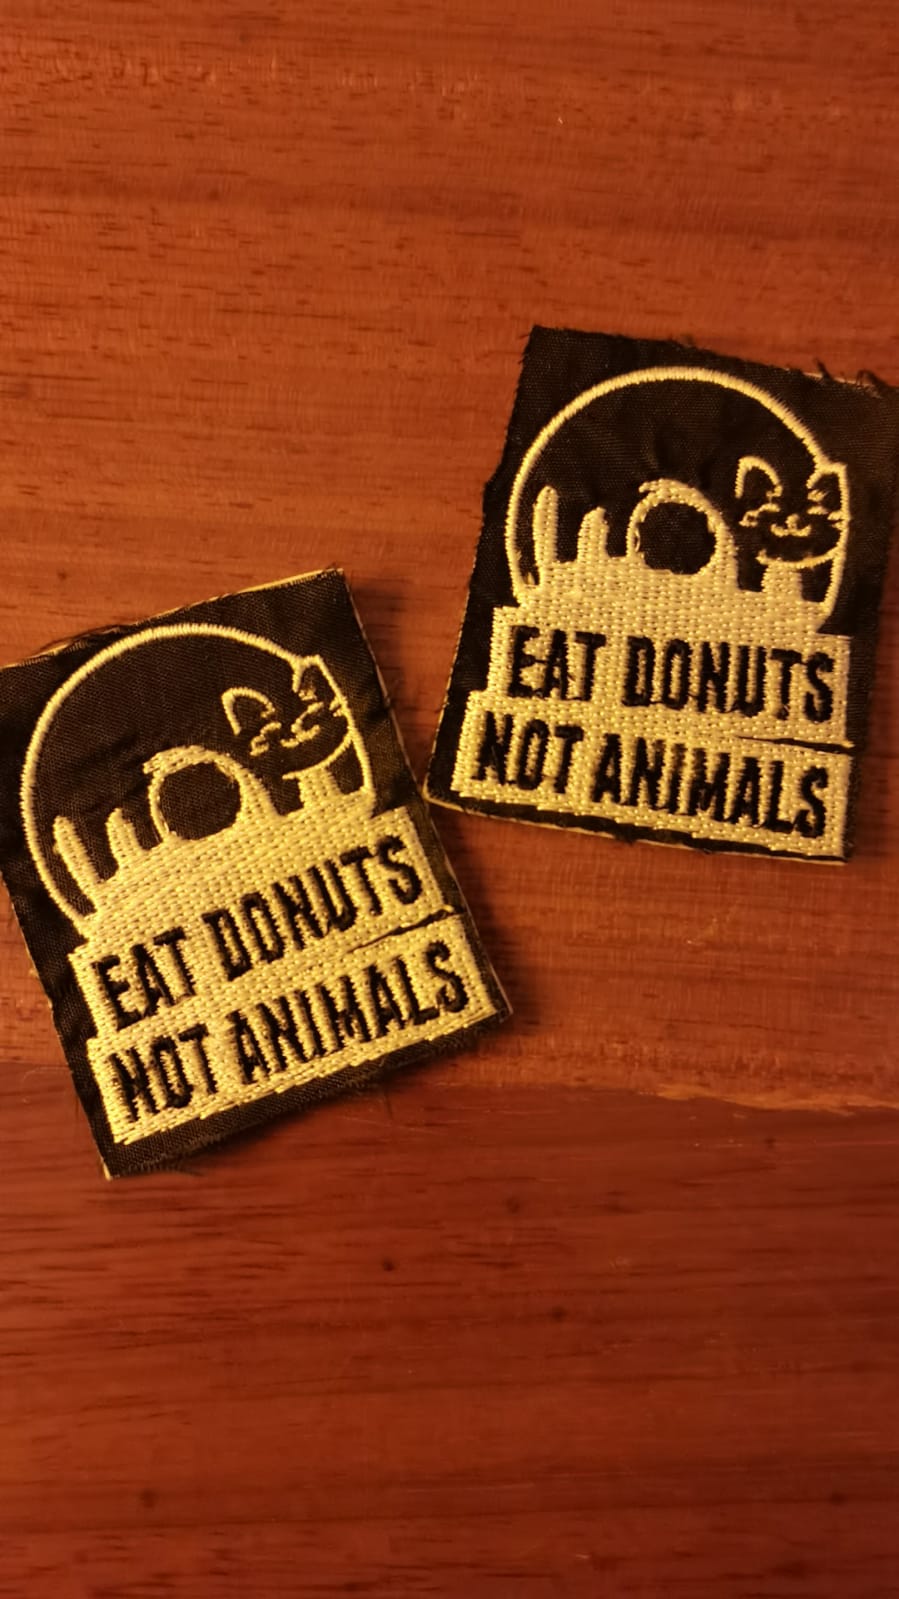 Eat Donuts Not Animals Patch